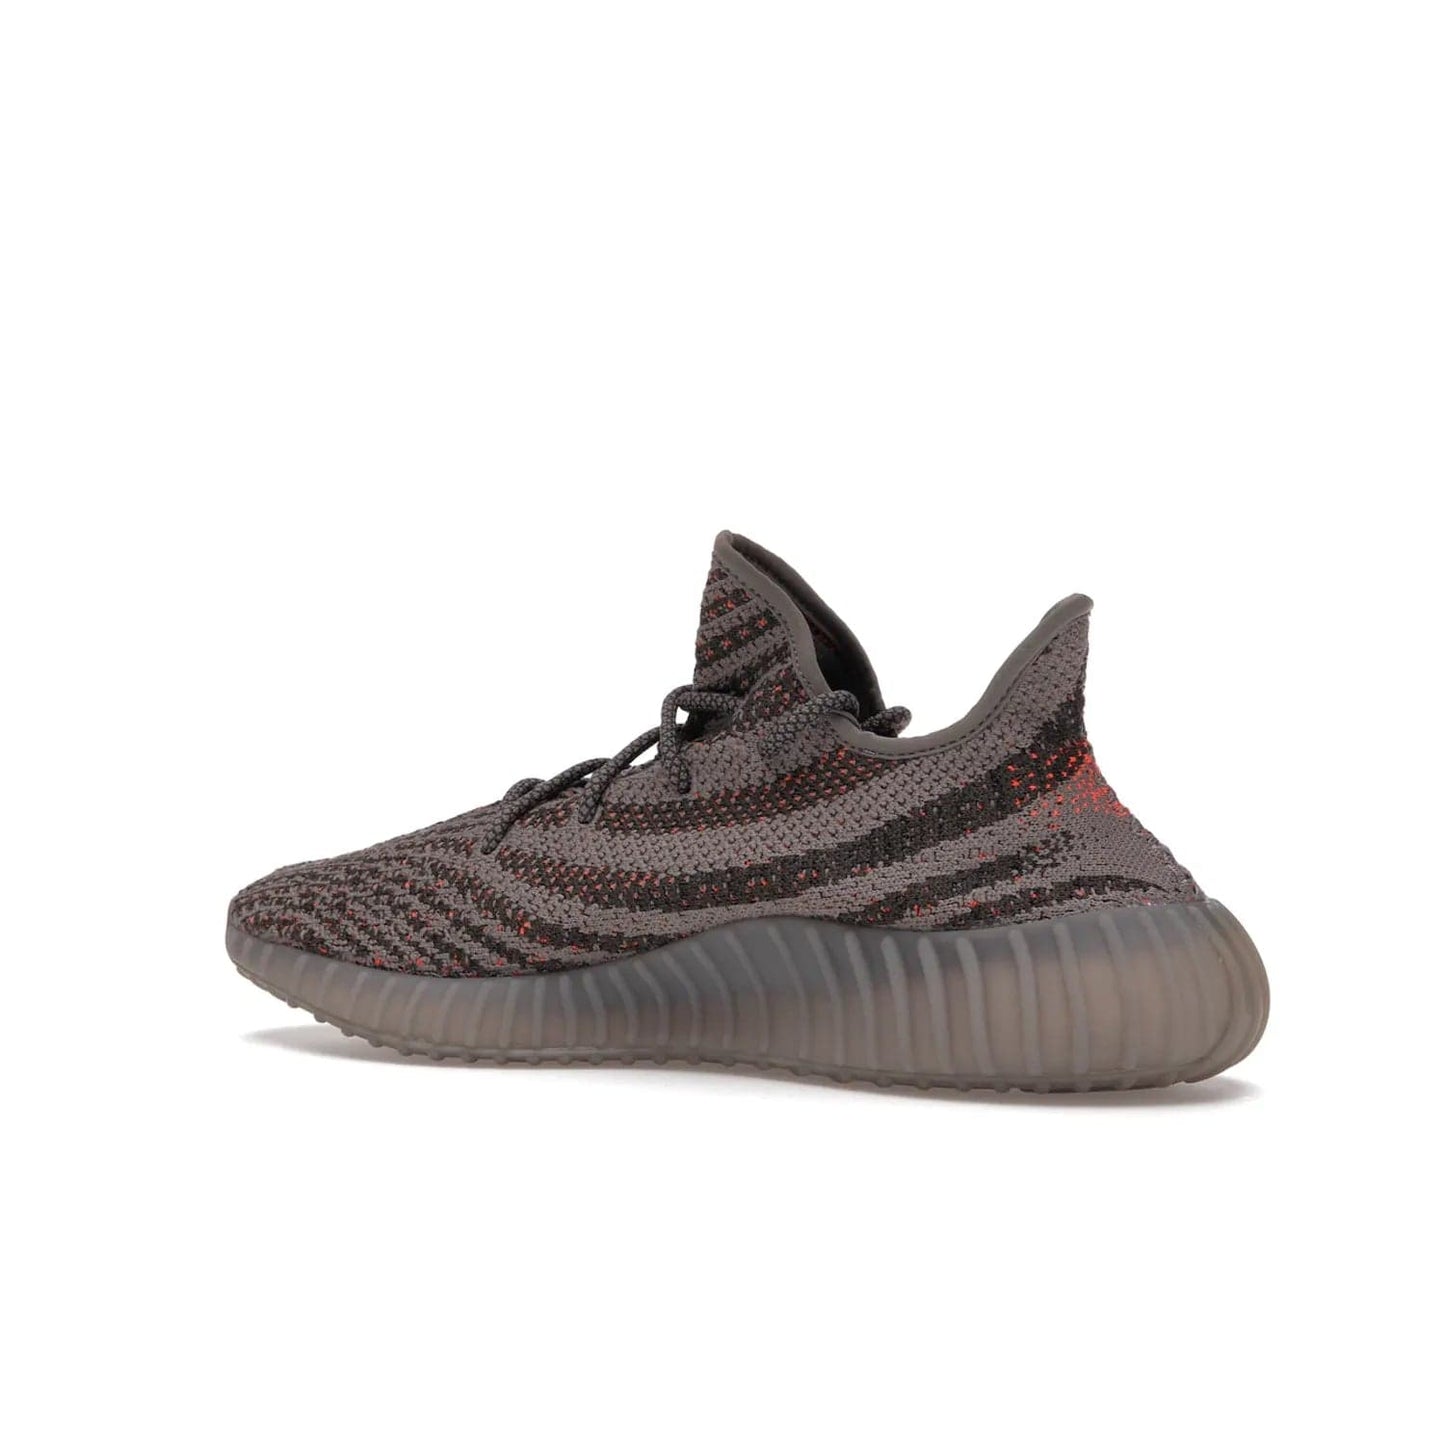 adidas Yeezy Boost 350 V2 Beluga Reflective - Image 22 - Only at www.BallersClubKickz.com - Shop the adidas Yeezy Boost 350 V2 Beluga Reflective: a stylish, reflective sneaker that stands out. Featuring Boost sole, Primeknit upper & signature orange stripe. Available Dec 2021.